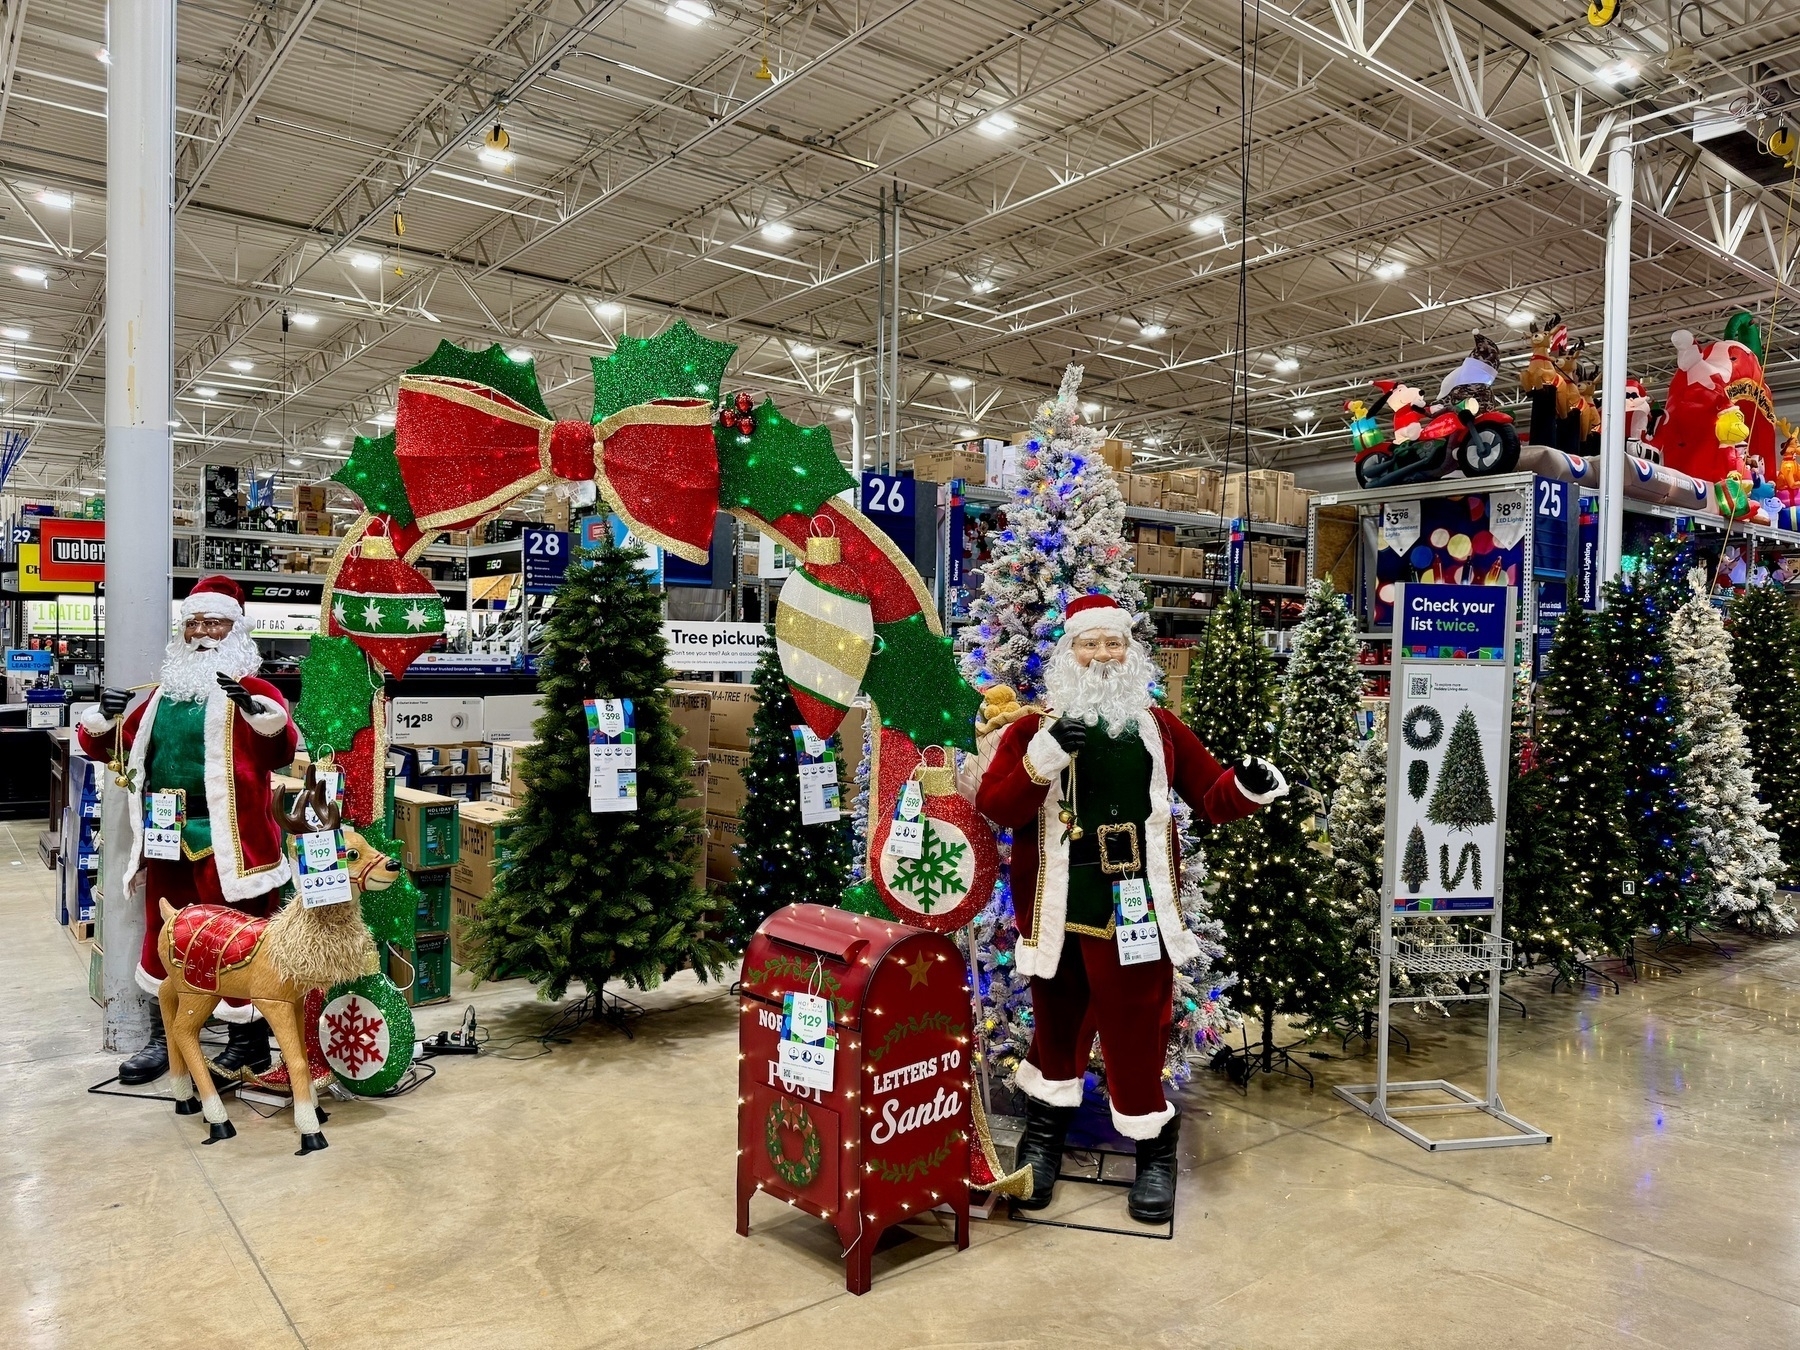 Christmas display at a hardware store: two Santa's standing in front of a series of pre-lit Christmas trees (some green, some sprayed with fake snow), and a giant arch made of holly, ribbons and bows.